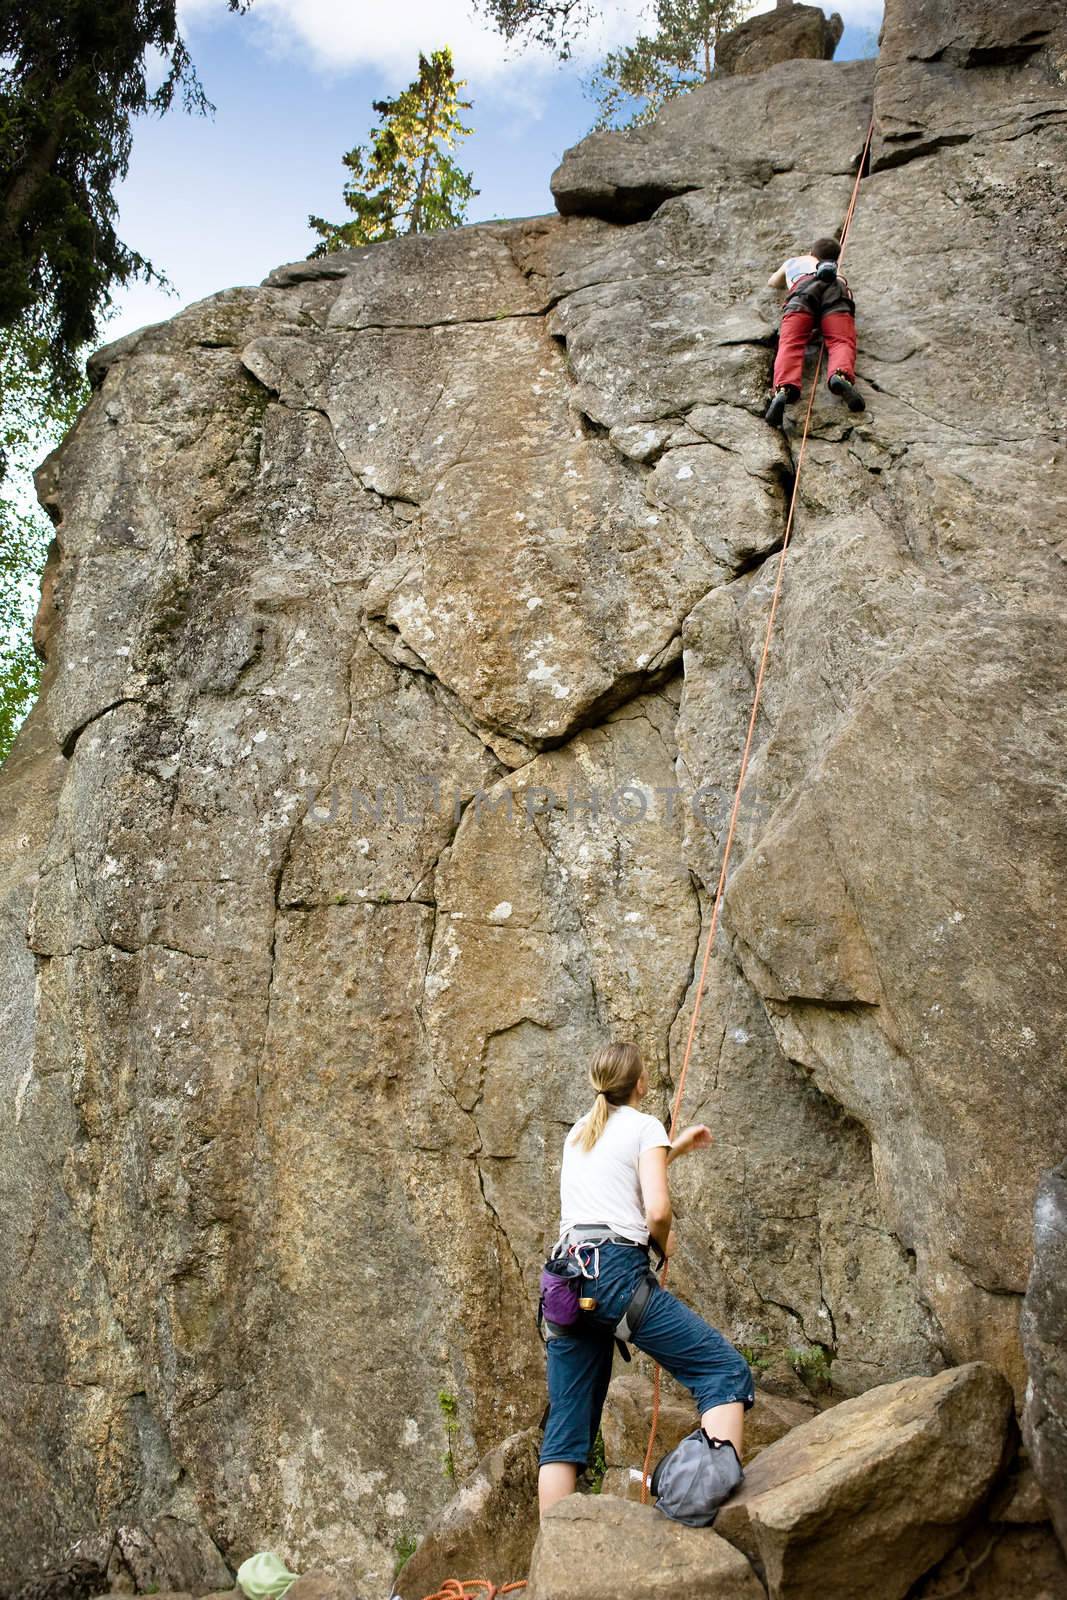 A female belaying a male on a steep rock face.